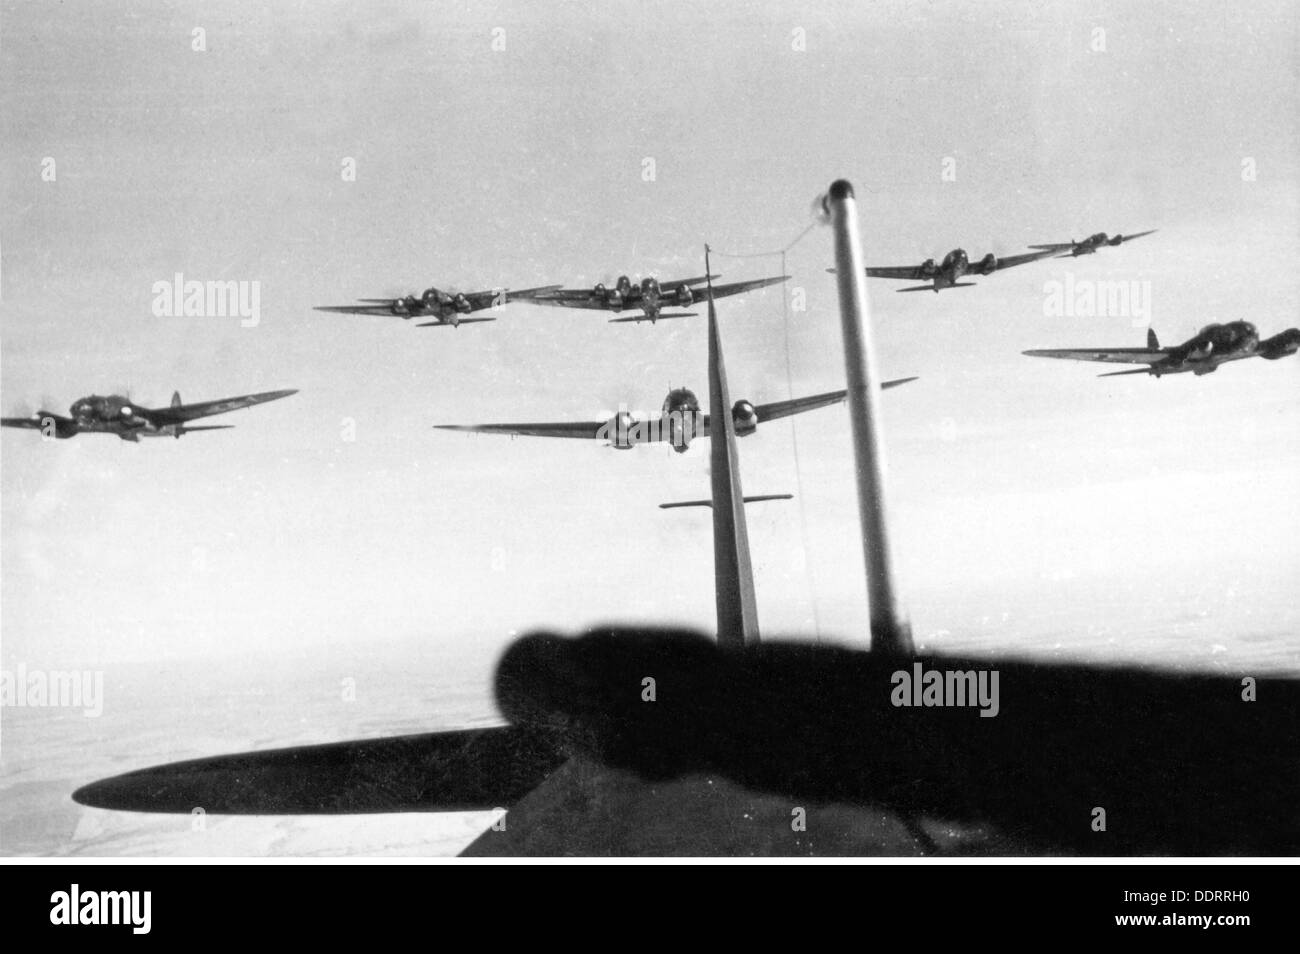 Second World War / WWII, aerial warfare, England, approaching German bombers Heinkel He 111, summer 1940, Battle for Britain, air raid, air attack, air raids, raid, raids, Luftwaffe (German Air Force), Wehrmacht, armed forces, aeroplane, airplane, plane, airplanes, aeroplanes, planes, aircraft, Germany, German Reich, Third Reich, Great Britain, flying, sky, 1940s, 40s, 20th century, second, 2nd, world war, world wars, approach, approaches, bomber, bombers, historic, historical, Additional-Rights-Clearences-Not Available Stock Photo